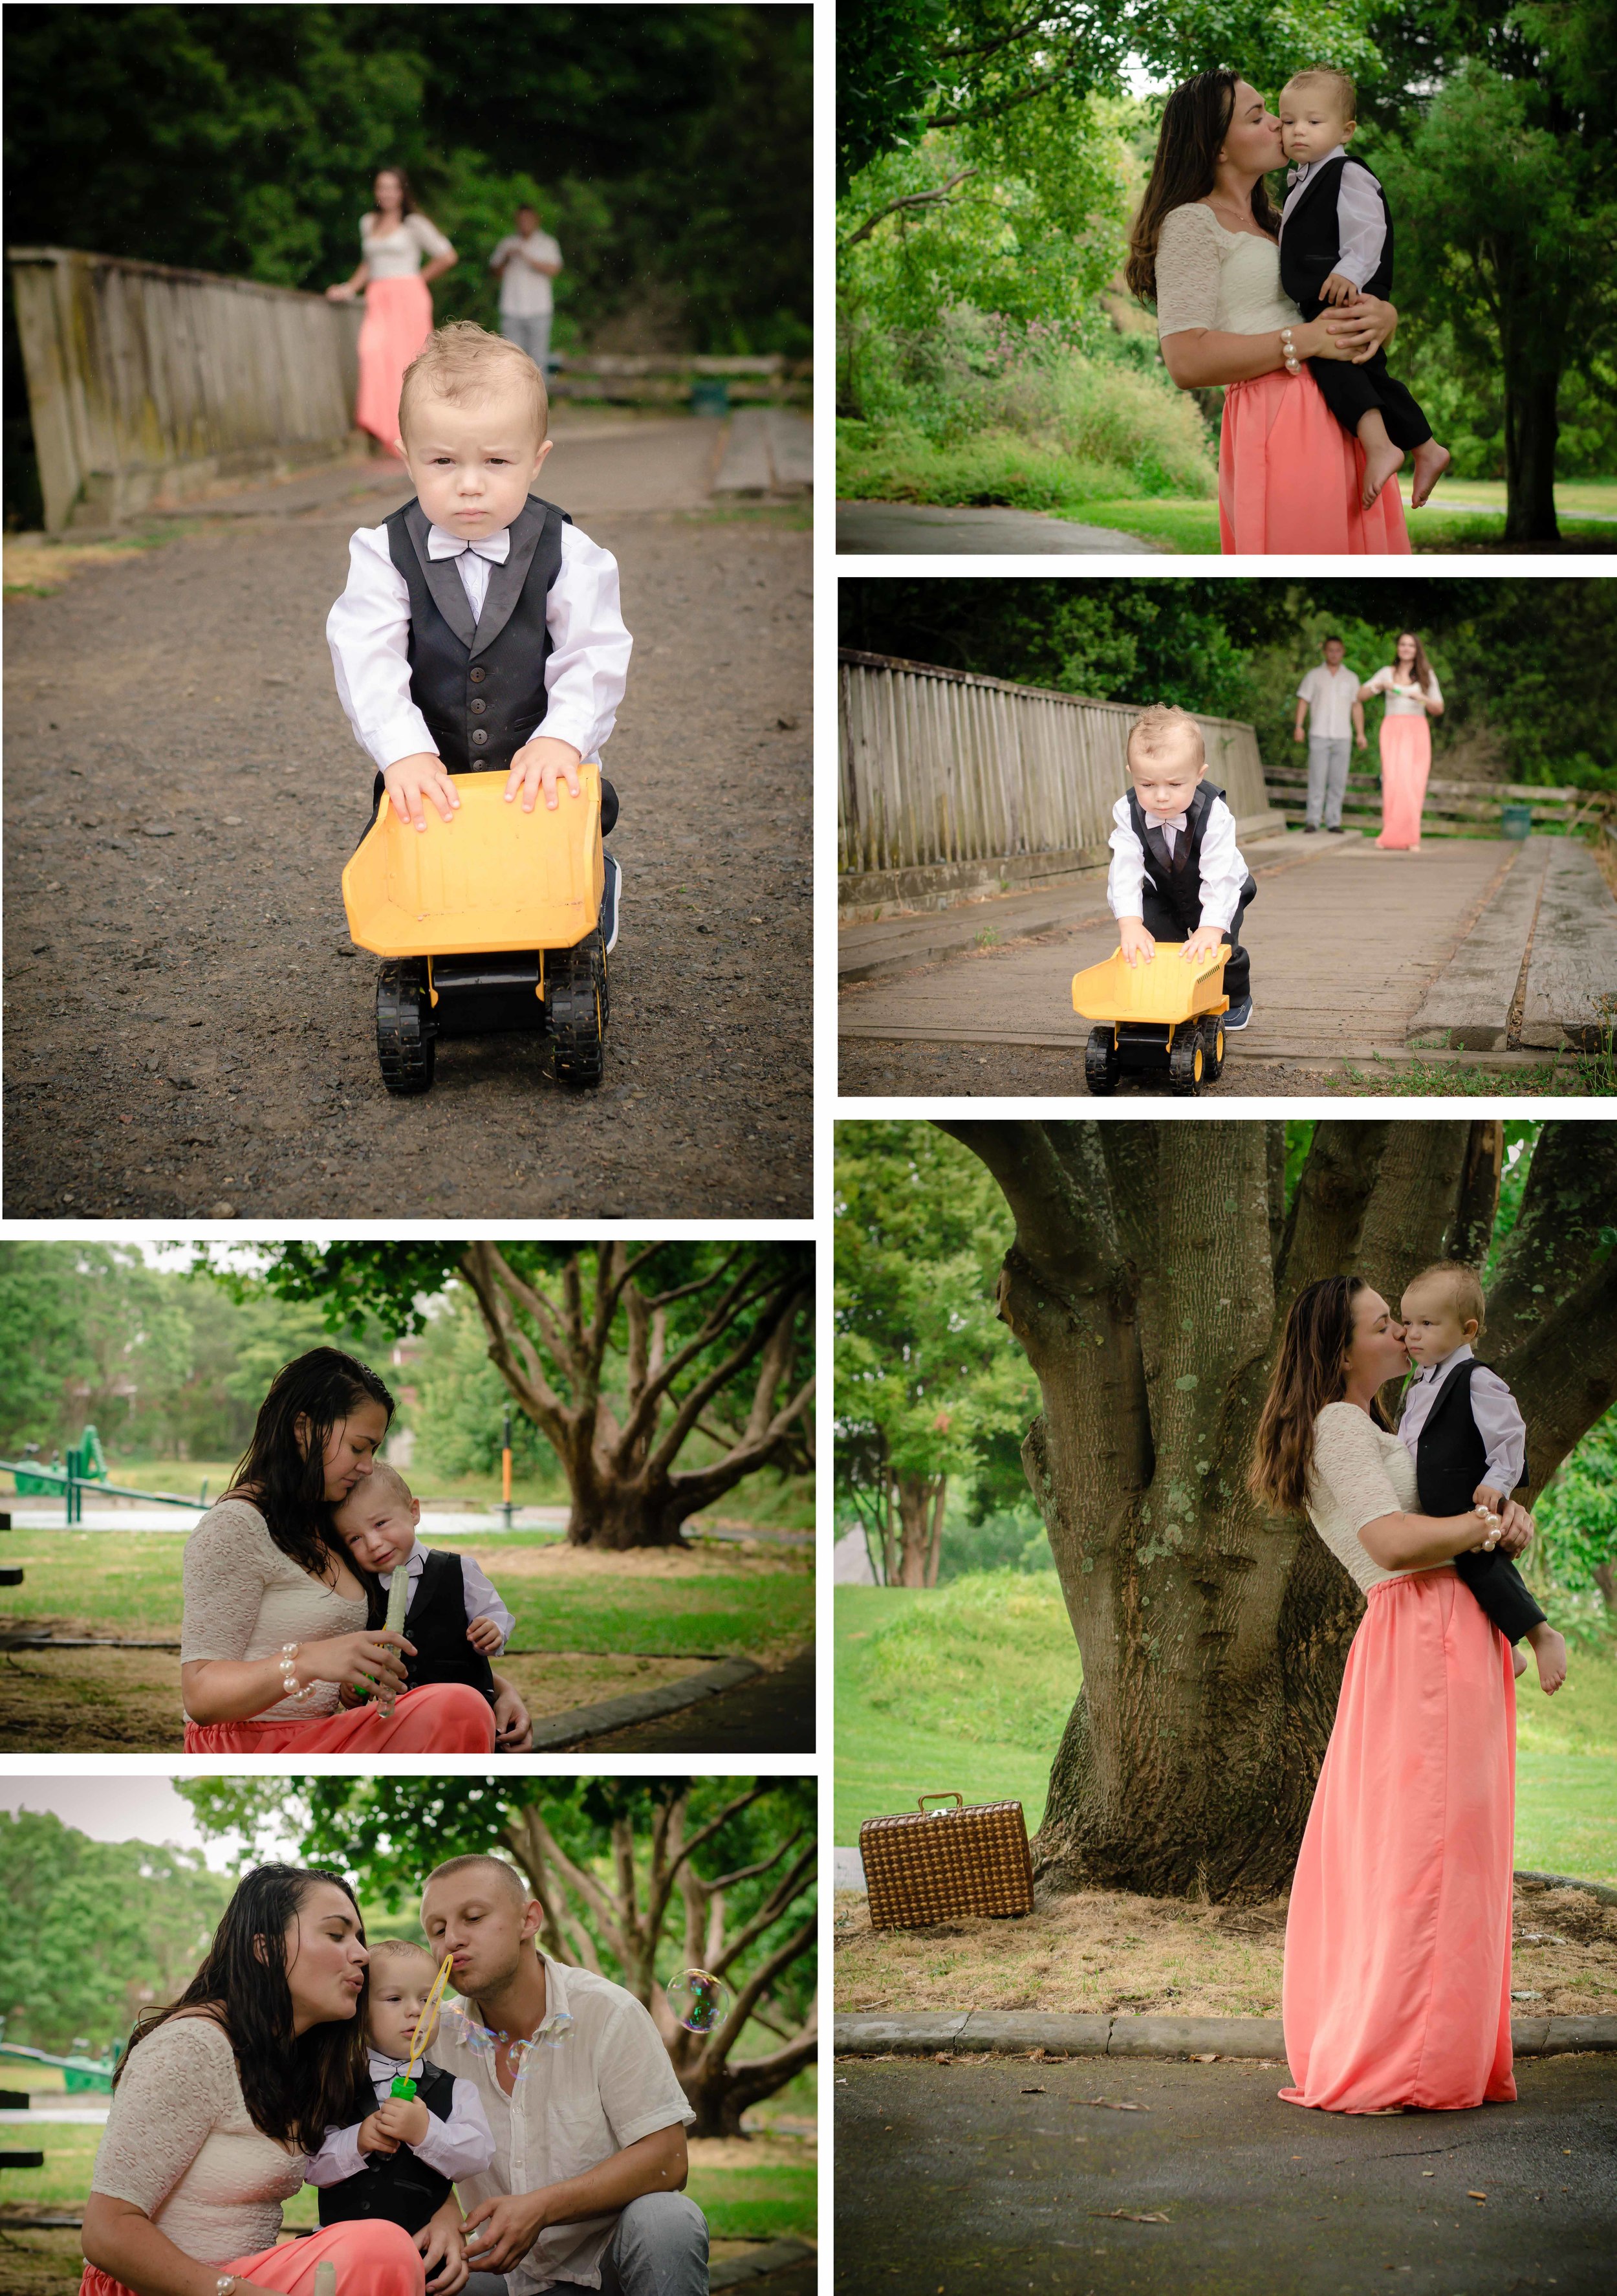 Rainy family session at the park {Kids-children photographer Auckland NZ}